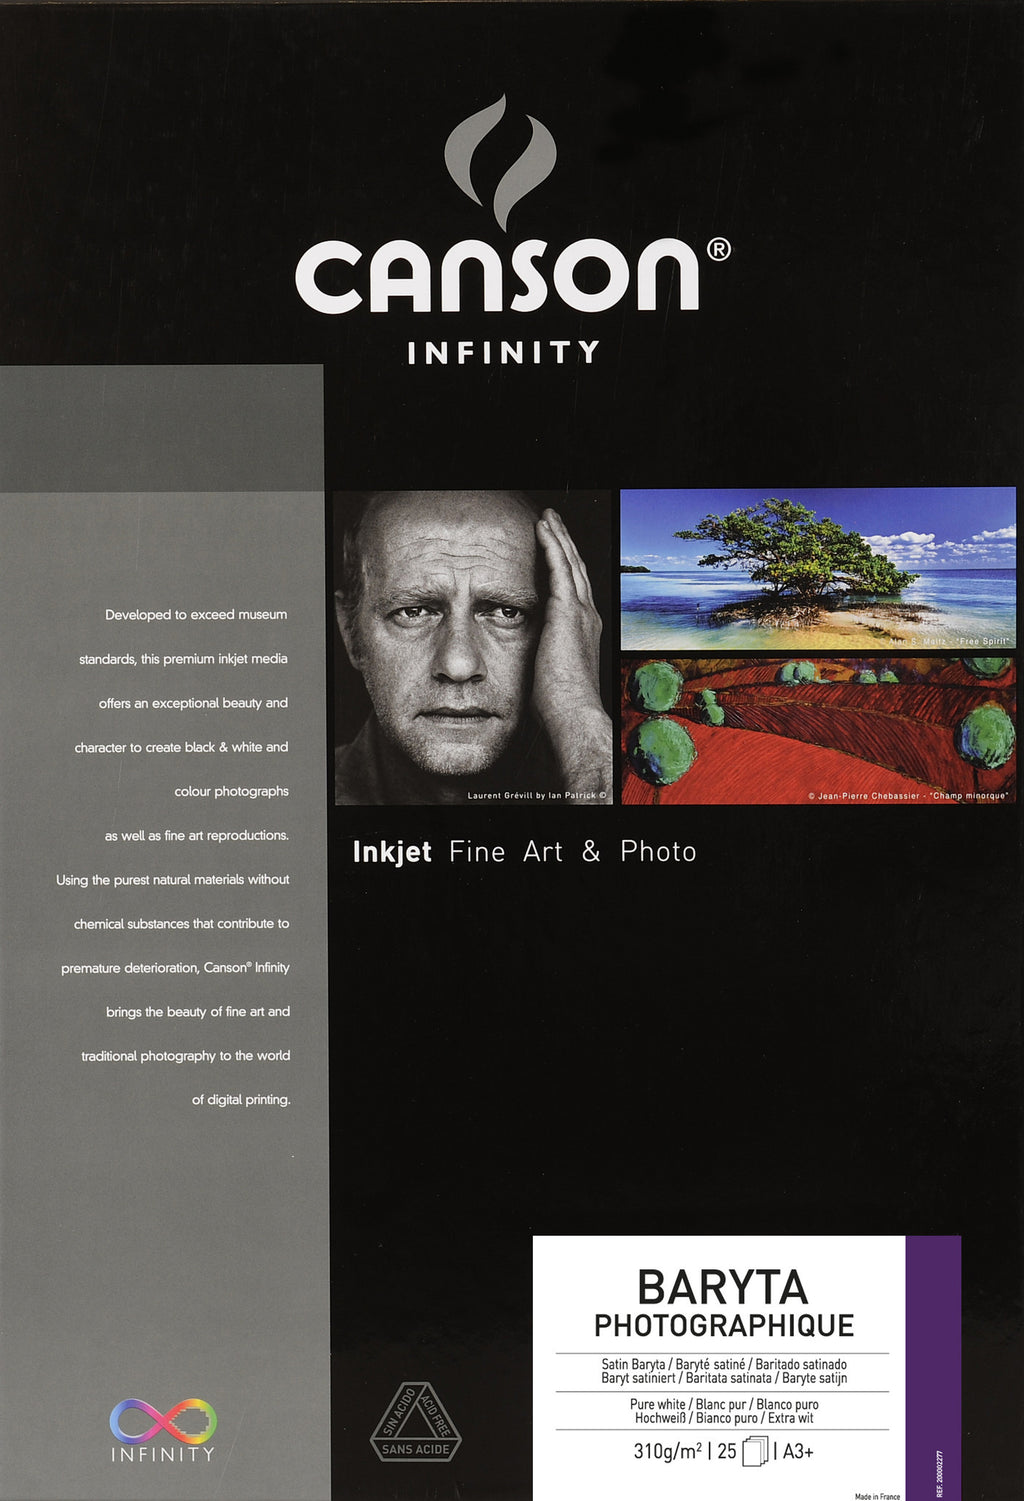 Canson Infinity Baryta Photographique - 310gsm - A3+ - 25 sheets - Wall Your Photos